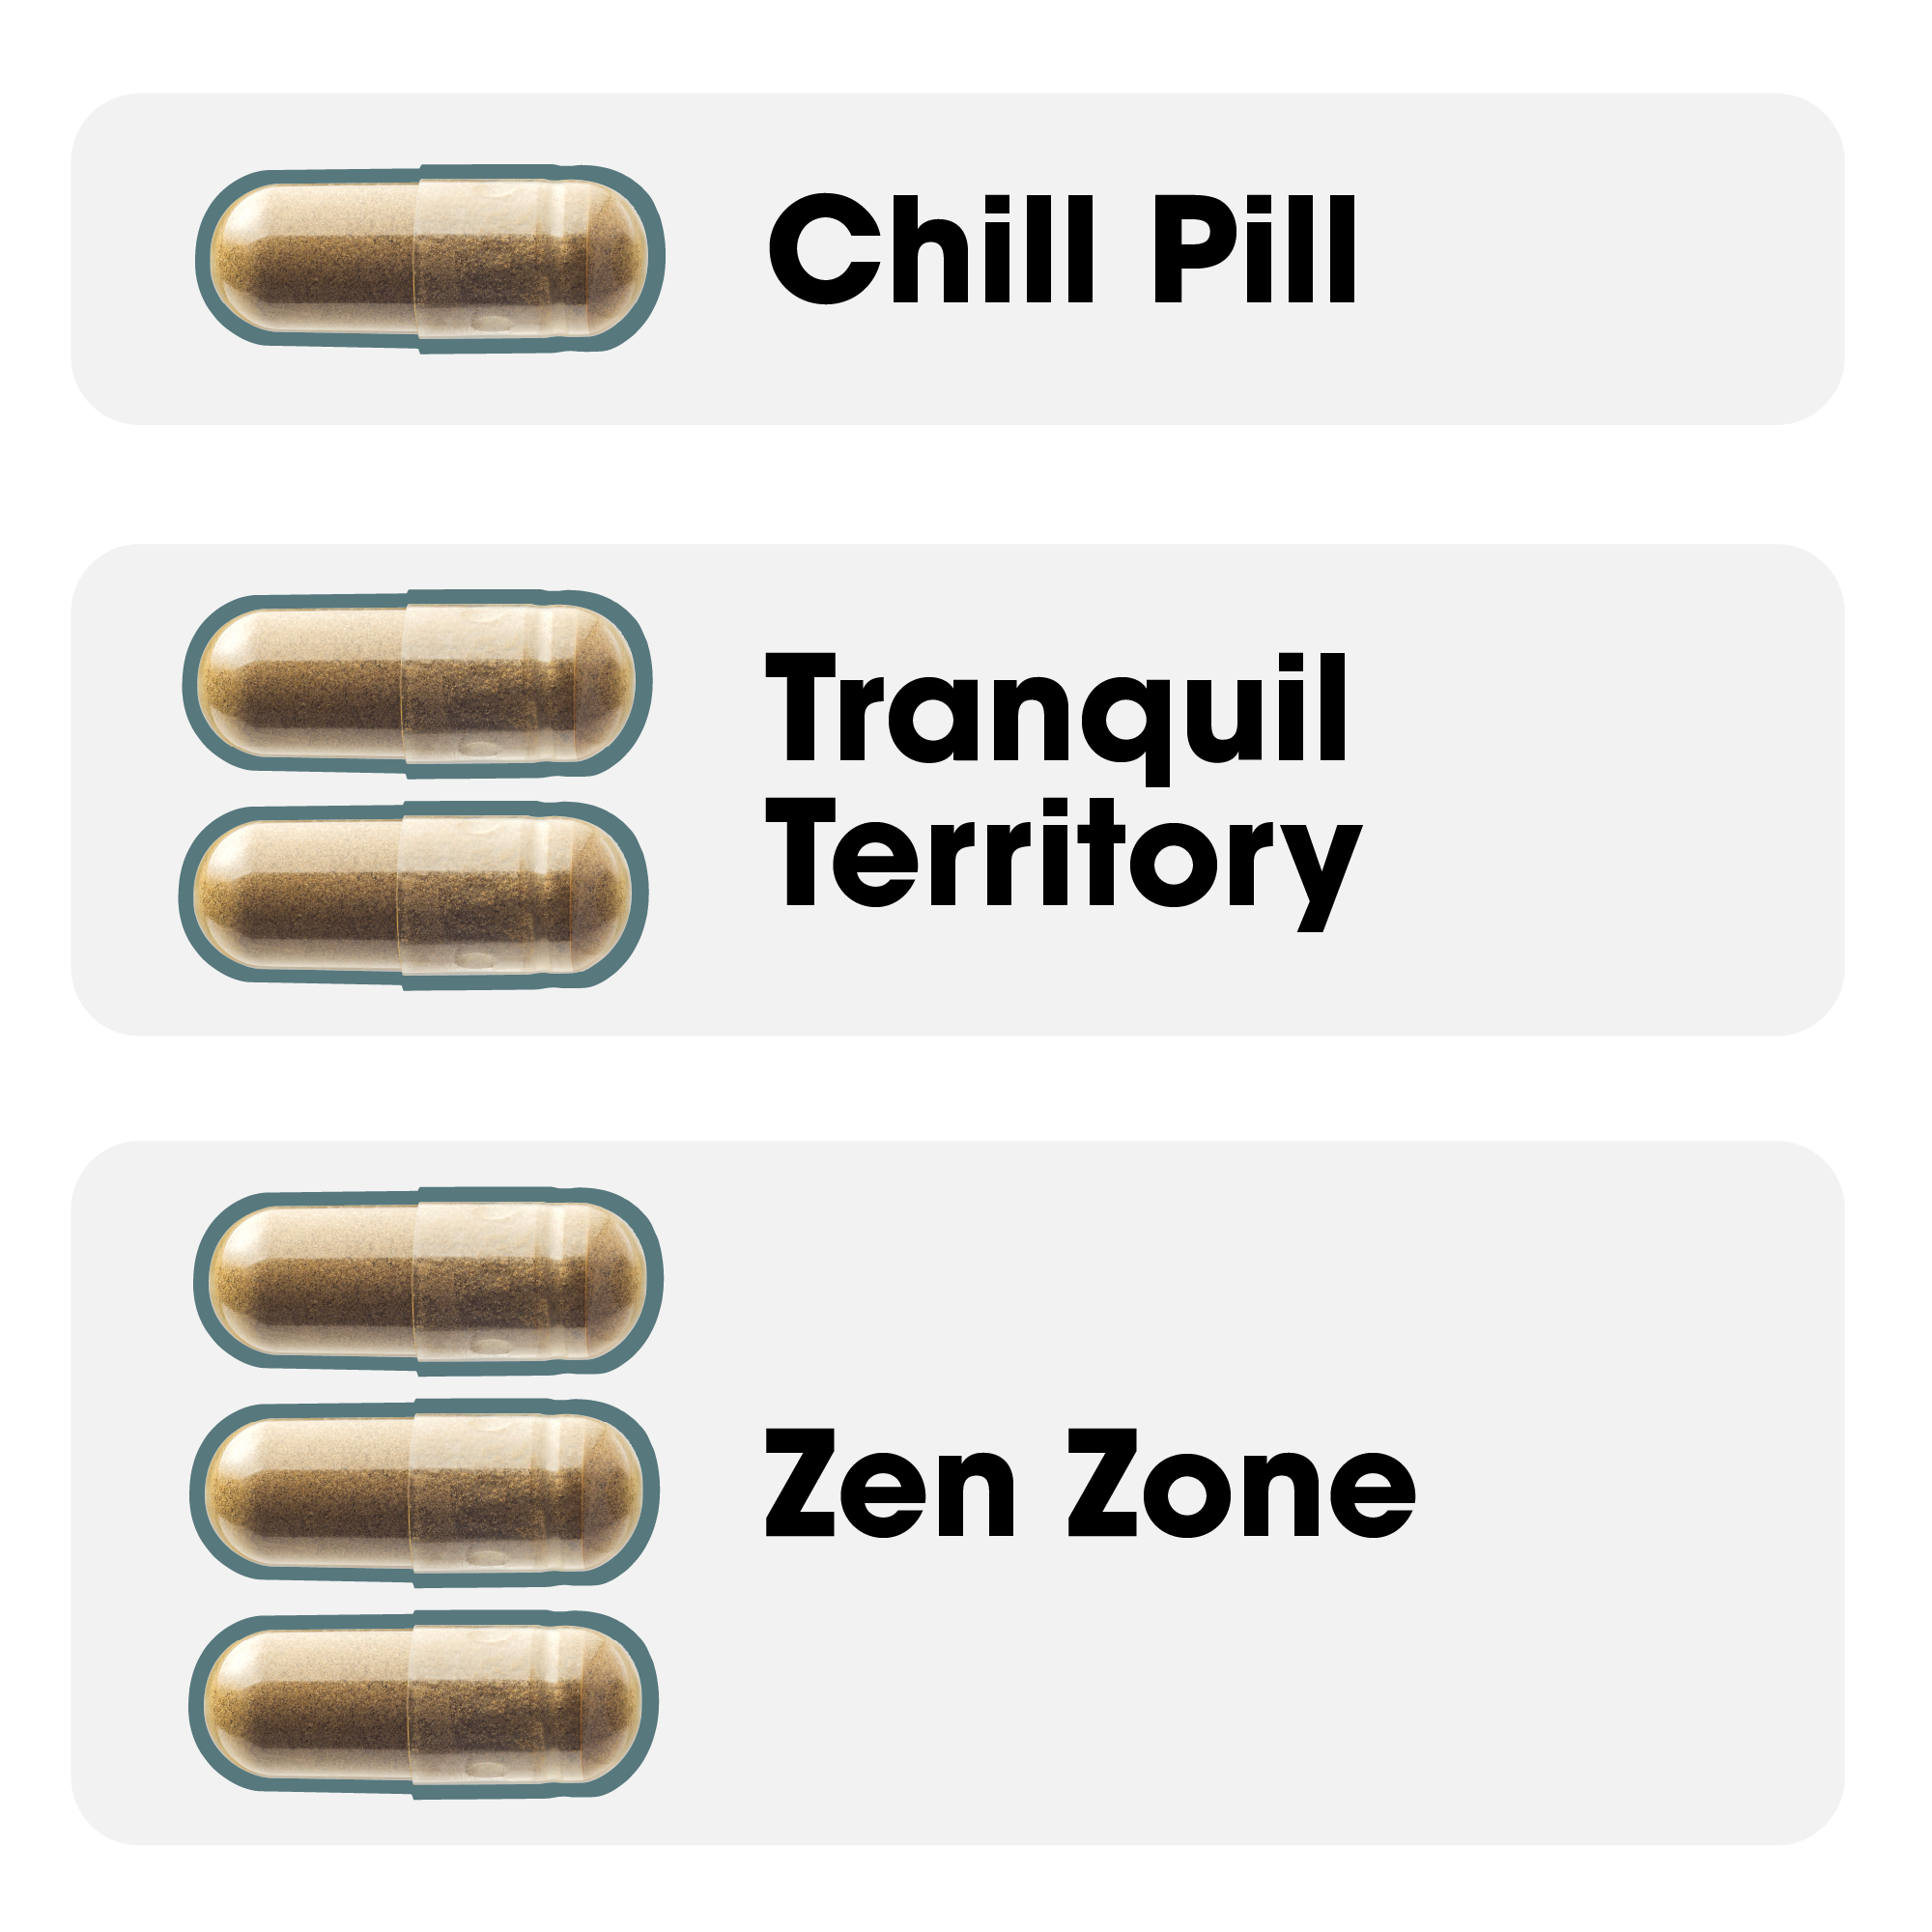 Dosages: 1 capsule represents a chill pill, two capsules represents tranquil territory, three capsules represent zen zone.  